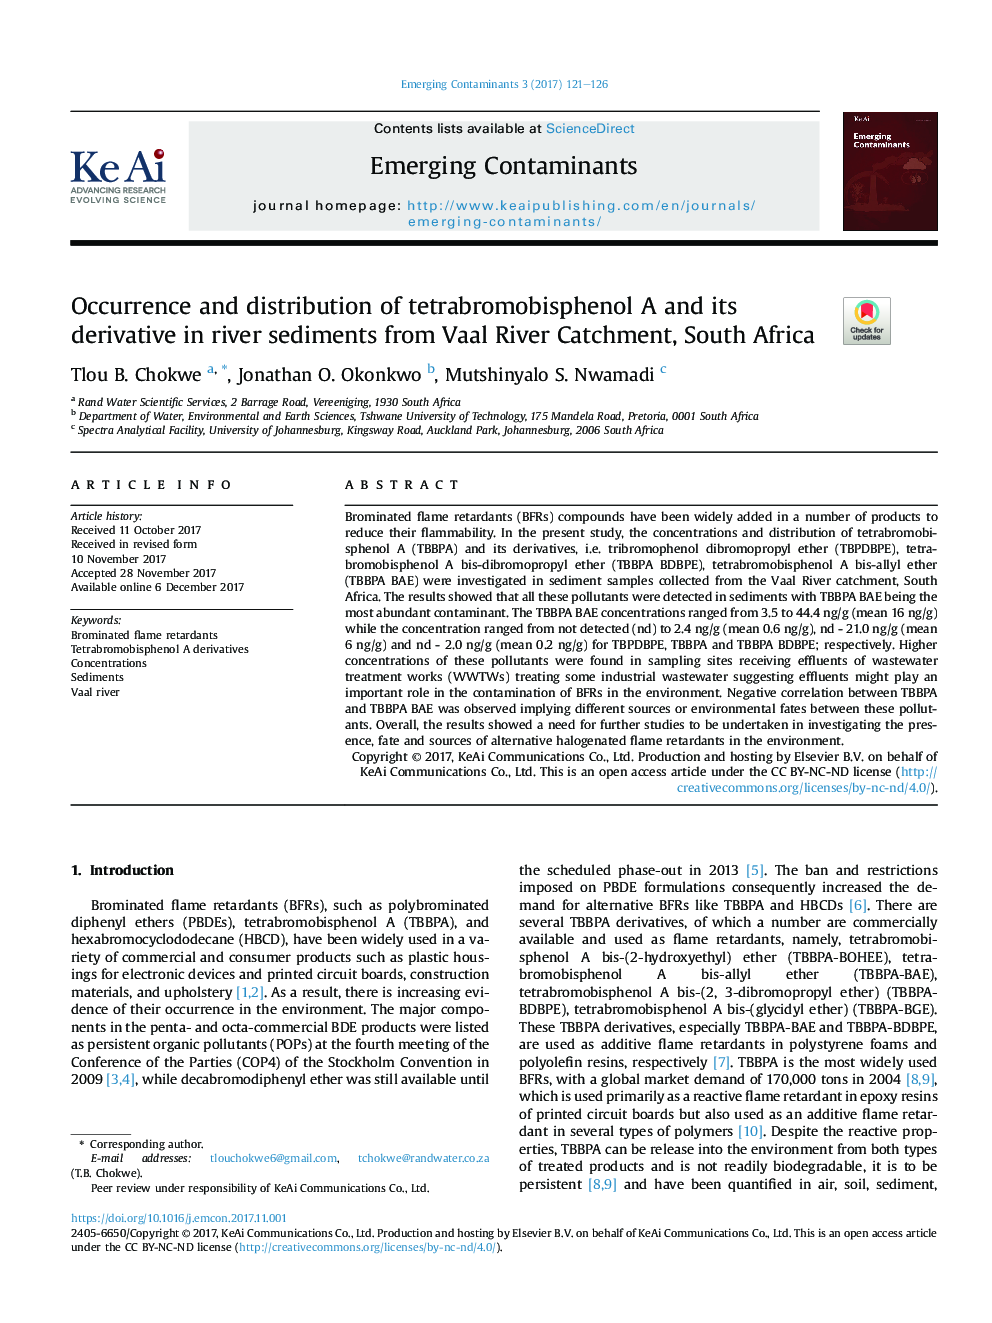 Occurrence and distribution of tetrabromobisphenol A and its derivative in river sediments from Vaal River Catchment, South Africa